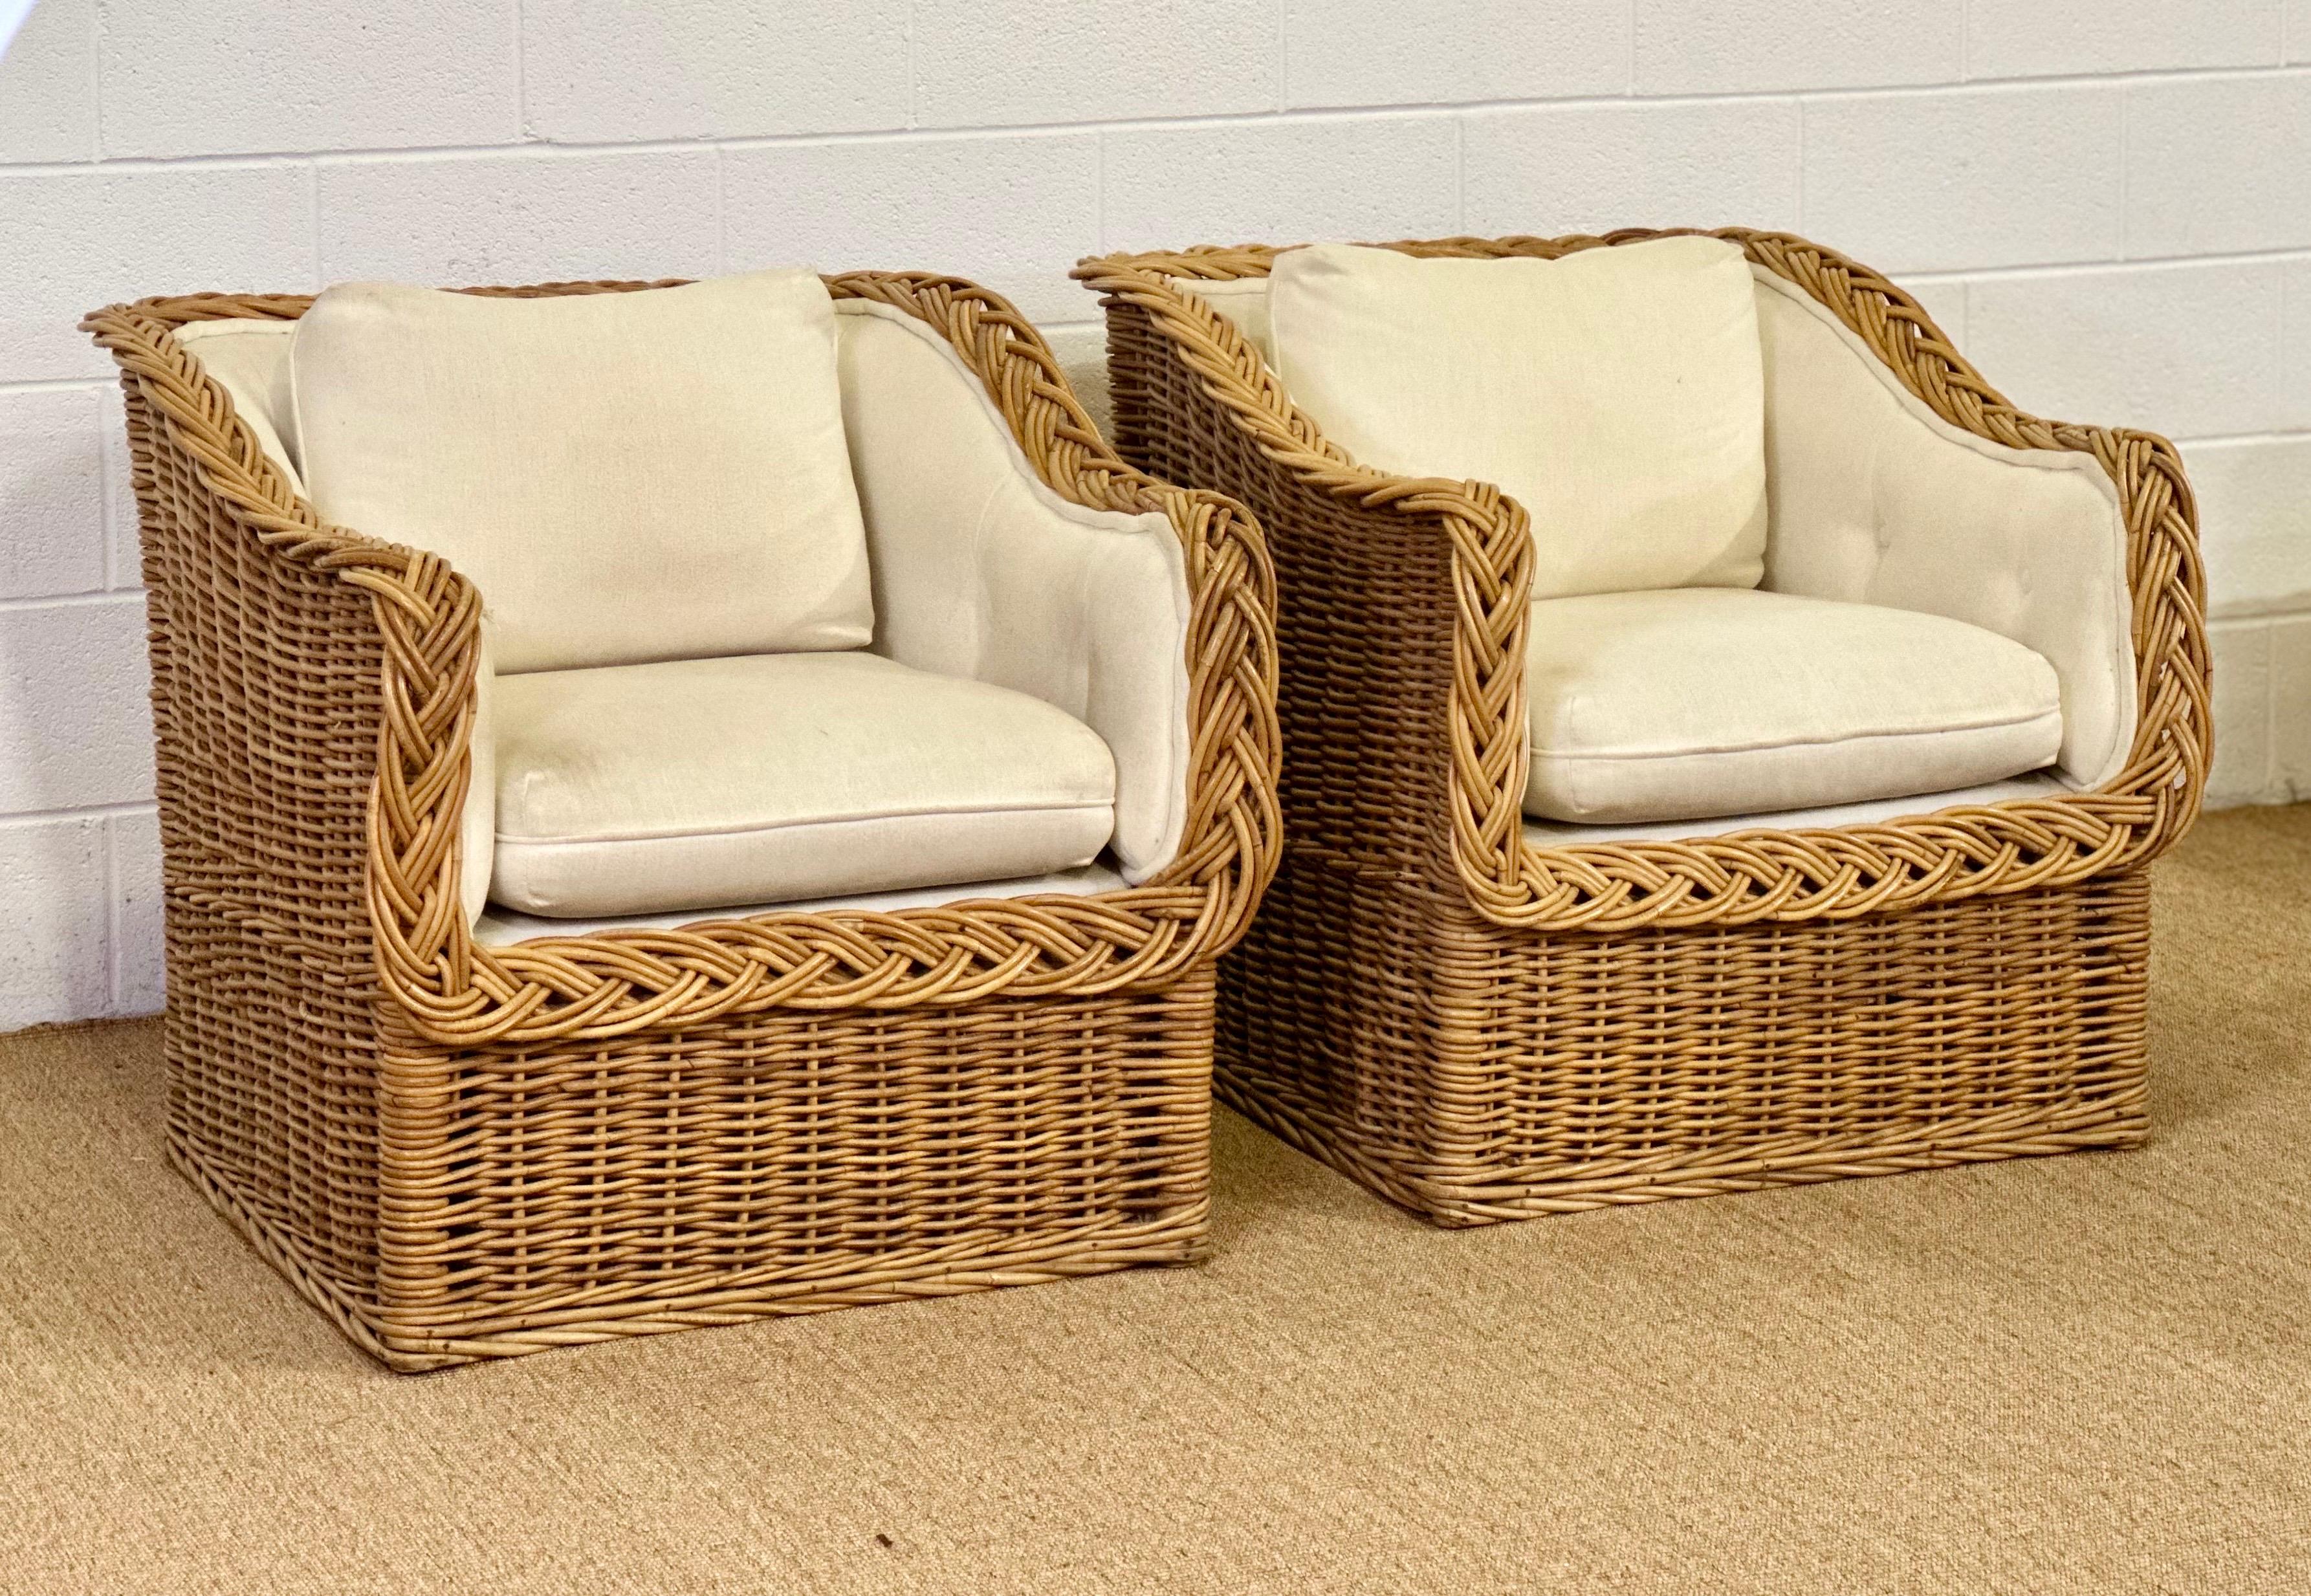 Italian Wicker Works Rattan Living Room Set - 4 Pieces  For Sale 4